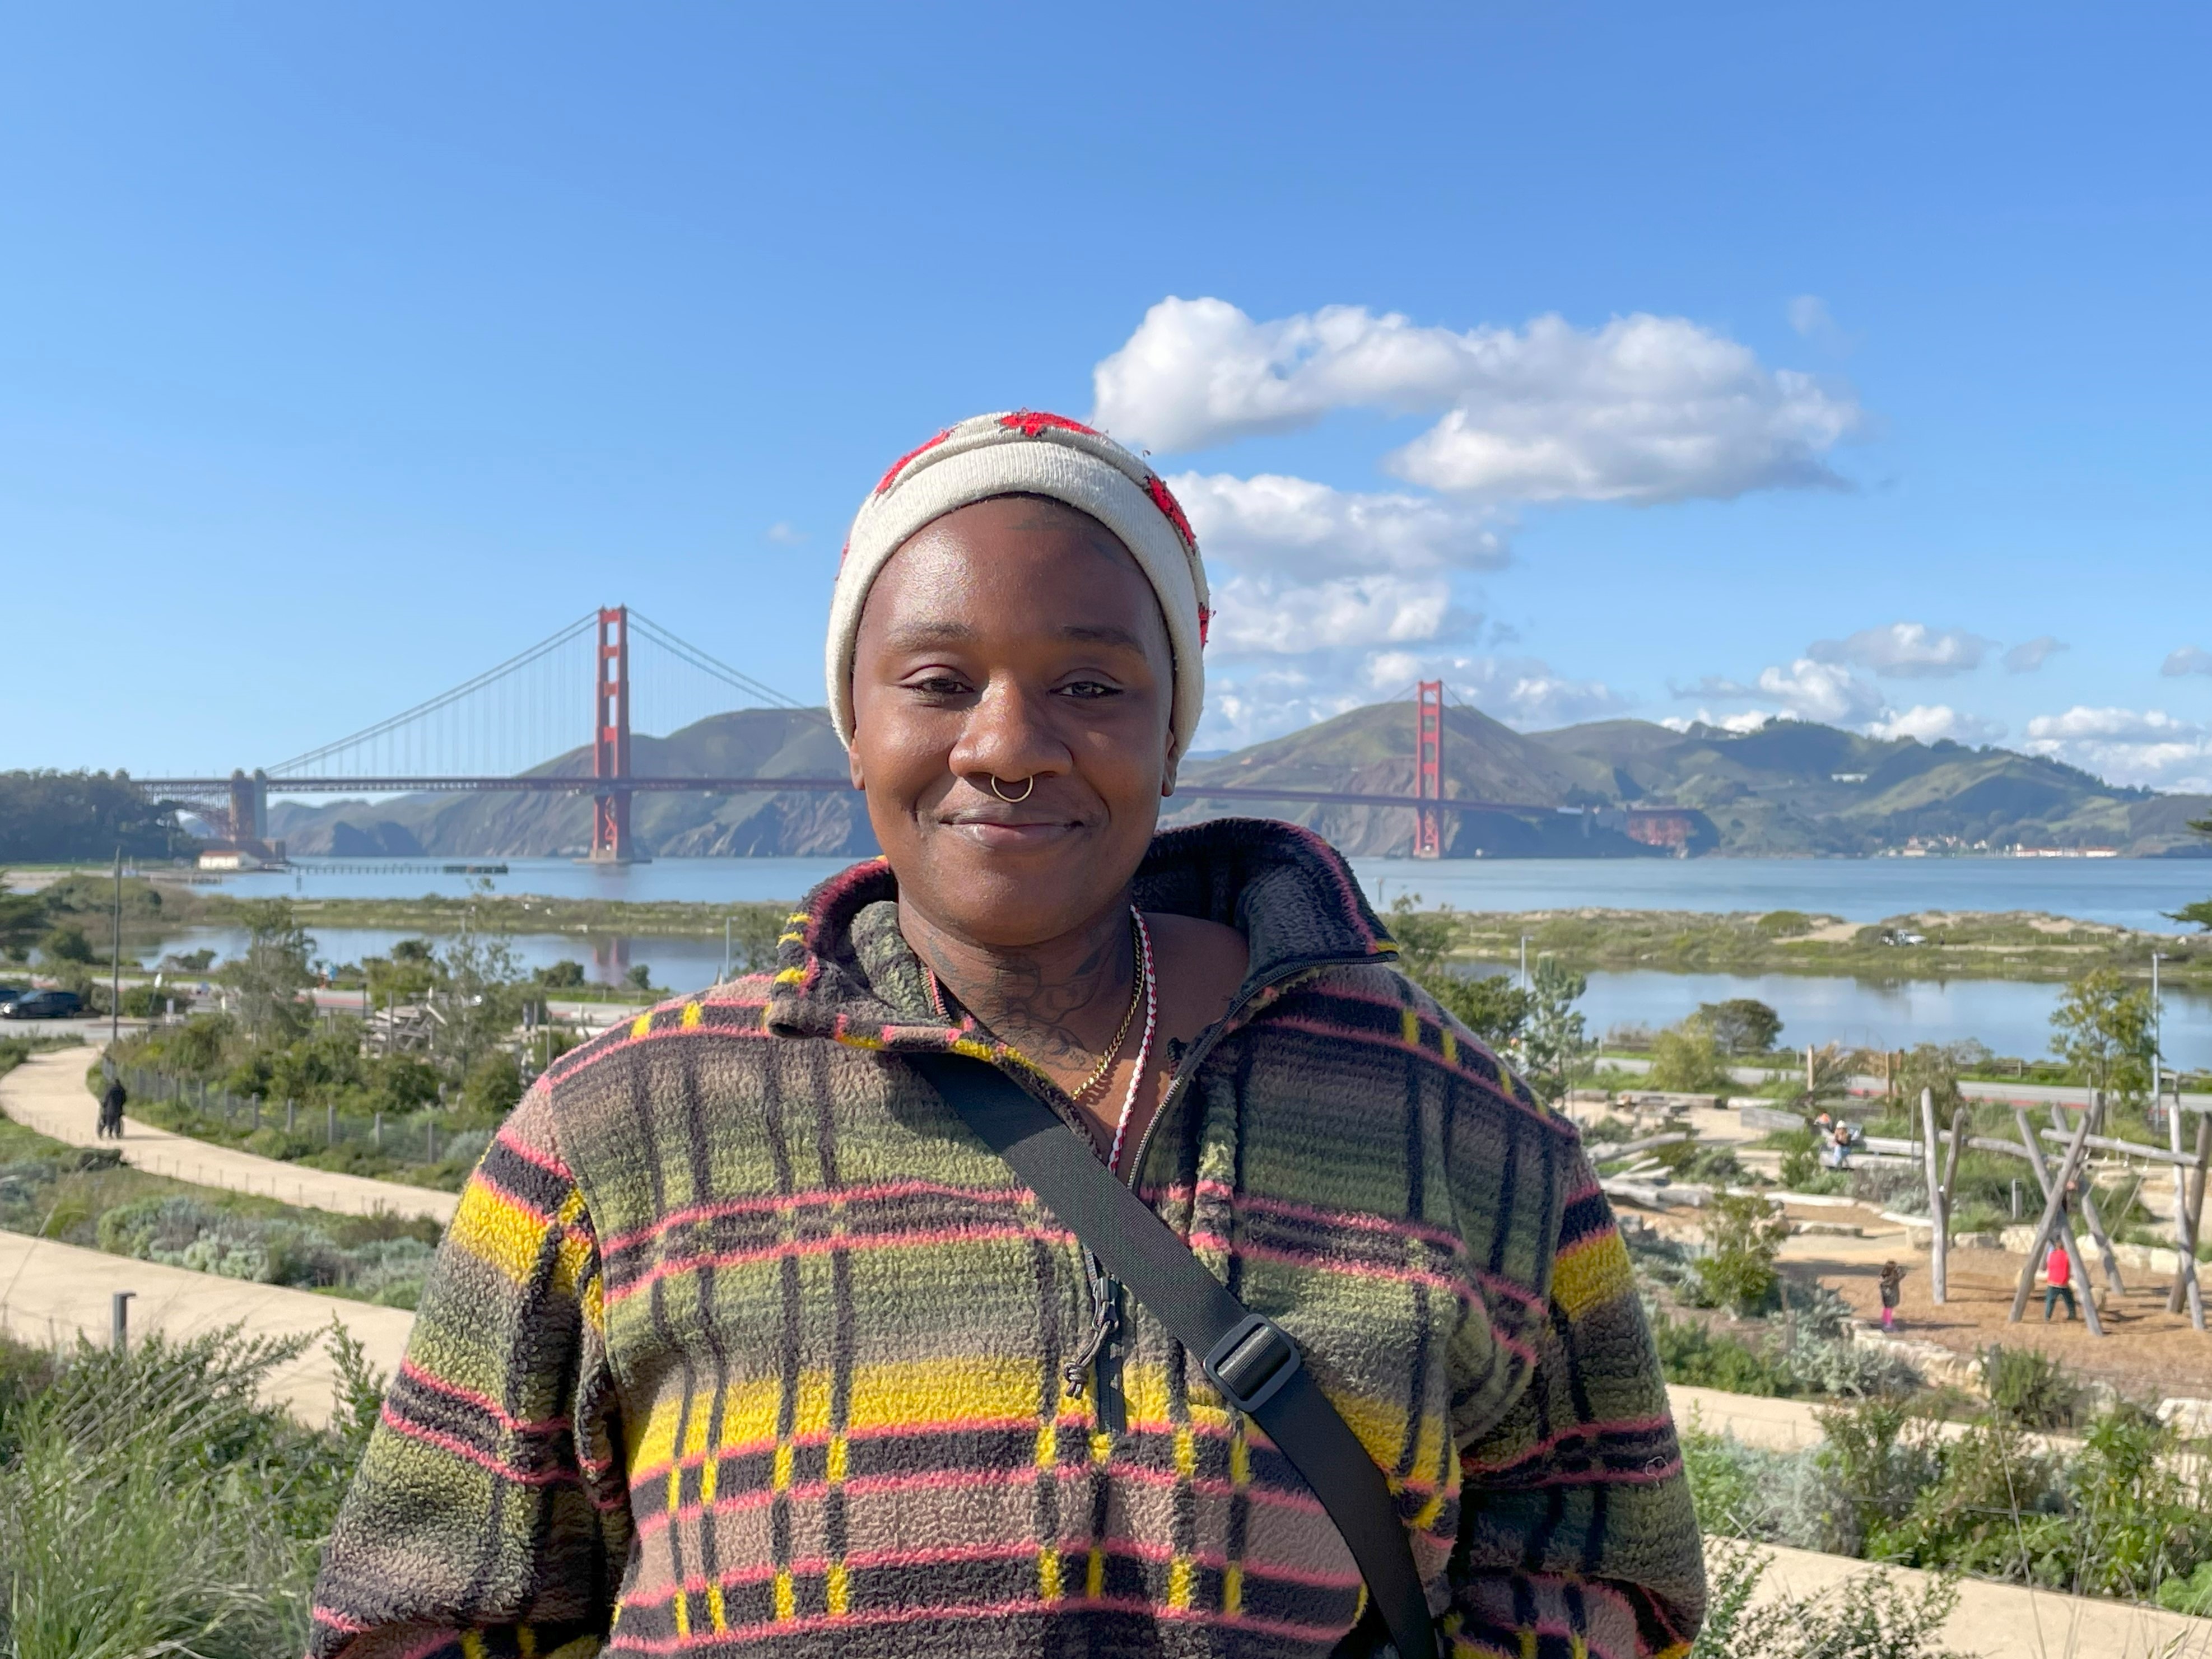 Image of a woman standing and smiling in a plaid jacket on the Presidio Tunnel Tops with the Golden Gate Bridge in the background.